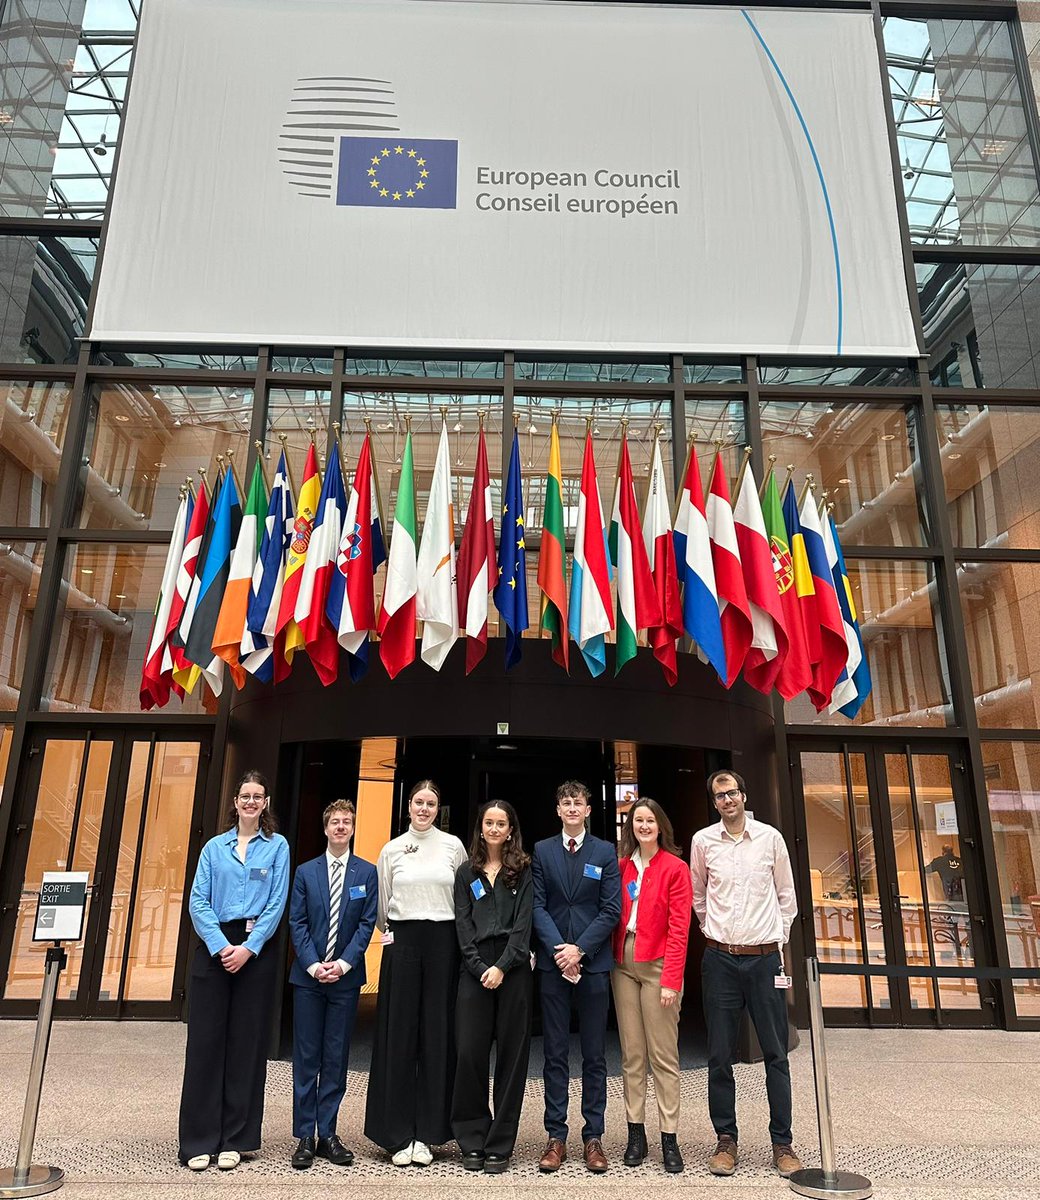 Proud of our student Tanguy ROIG who participated this week, with five other talented students, in the #ConSIMium, a Council simulation experience. The 🇧🇪 team was coordinated by @AlvaroOleart from the ULB. Well done! 👏